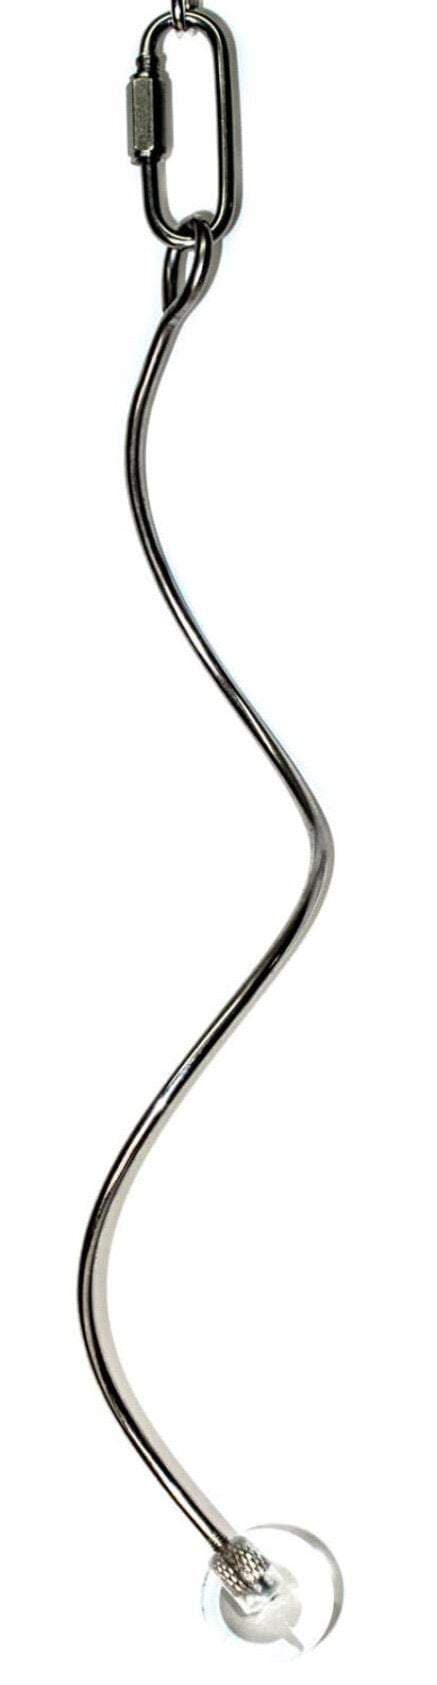 stainless steel skewer for bird toys